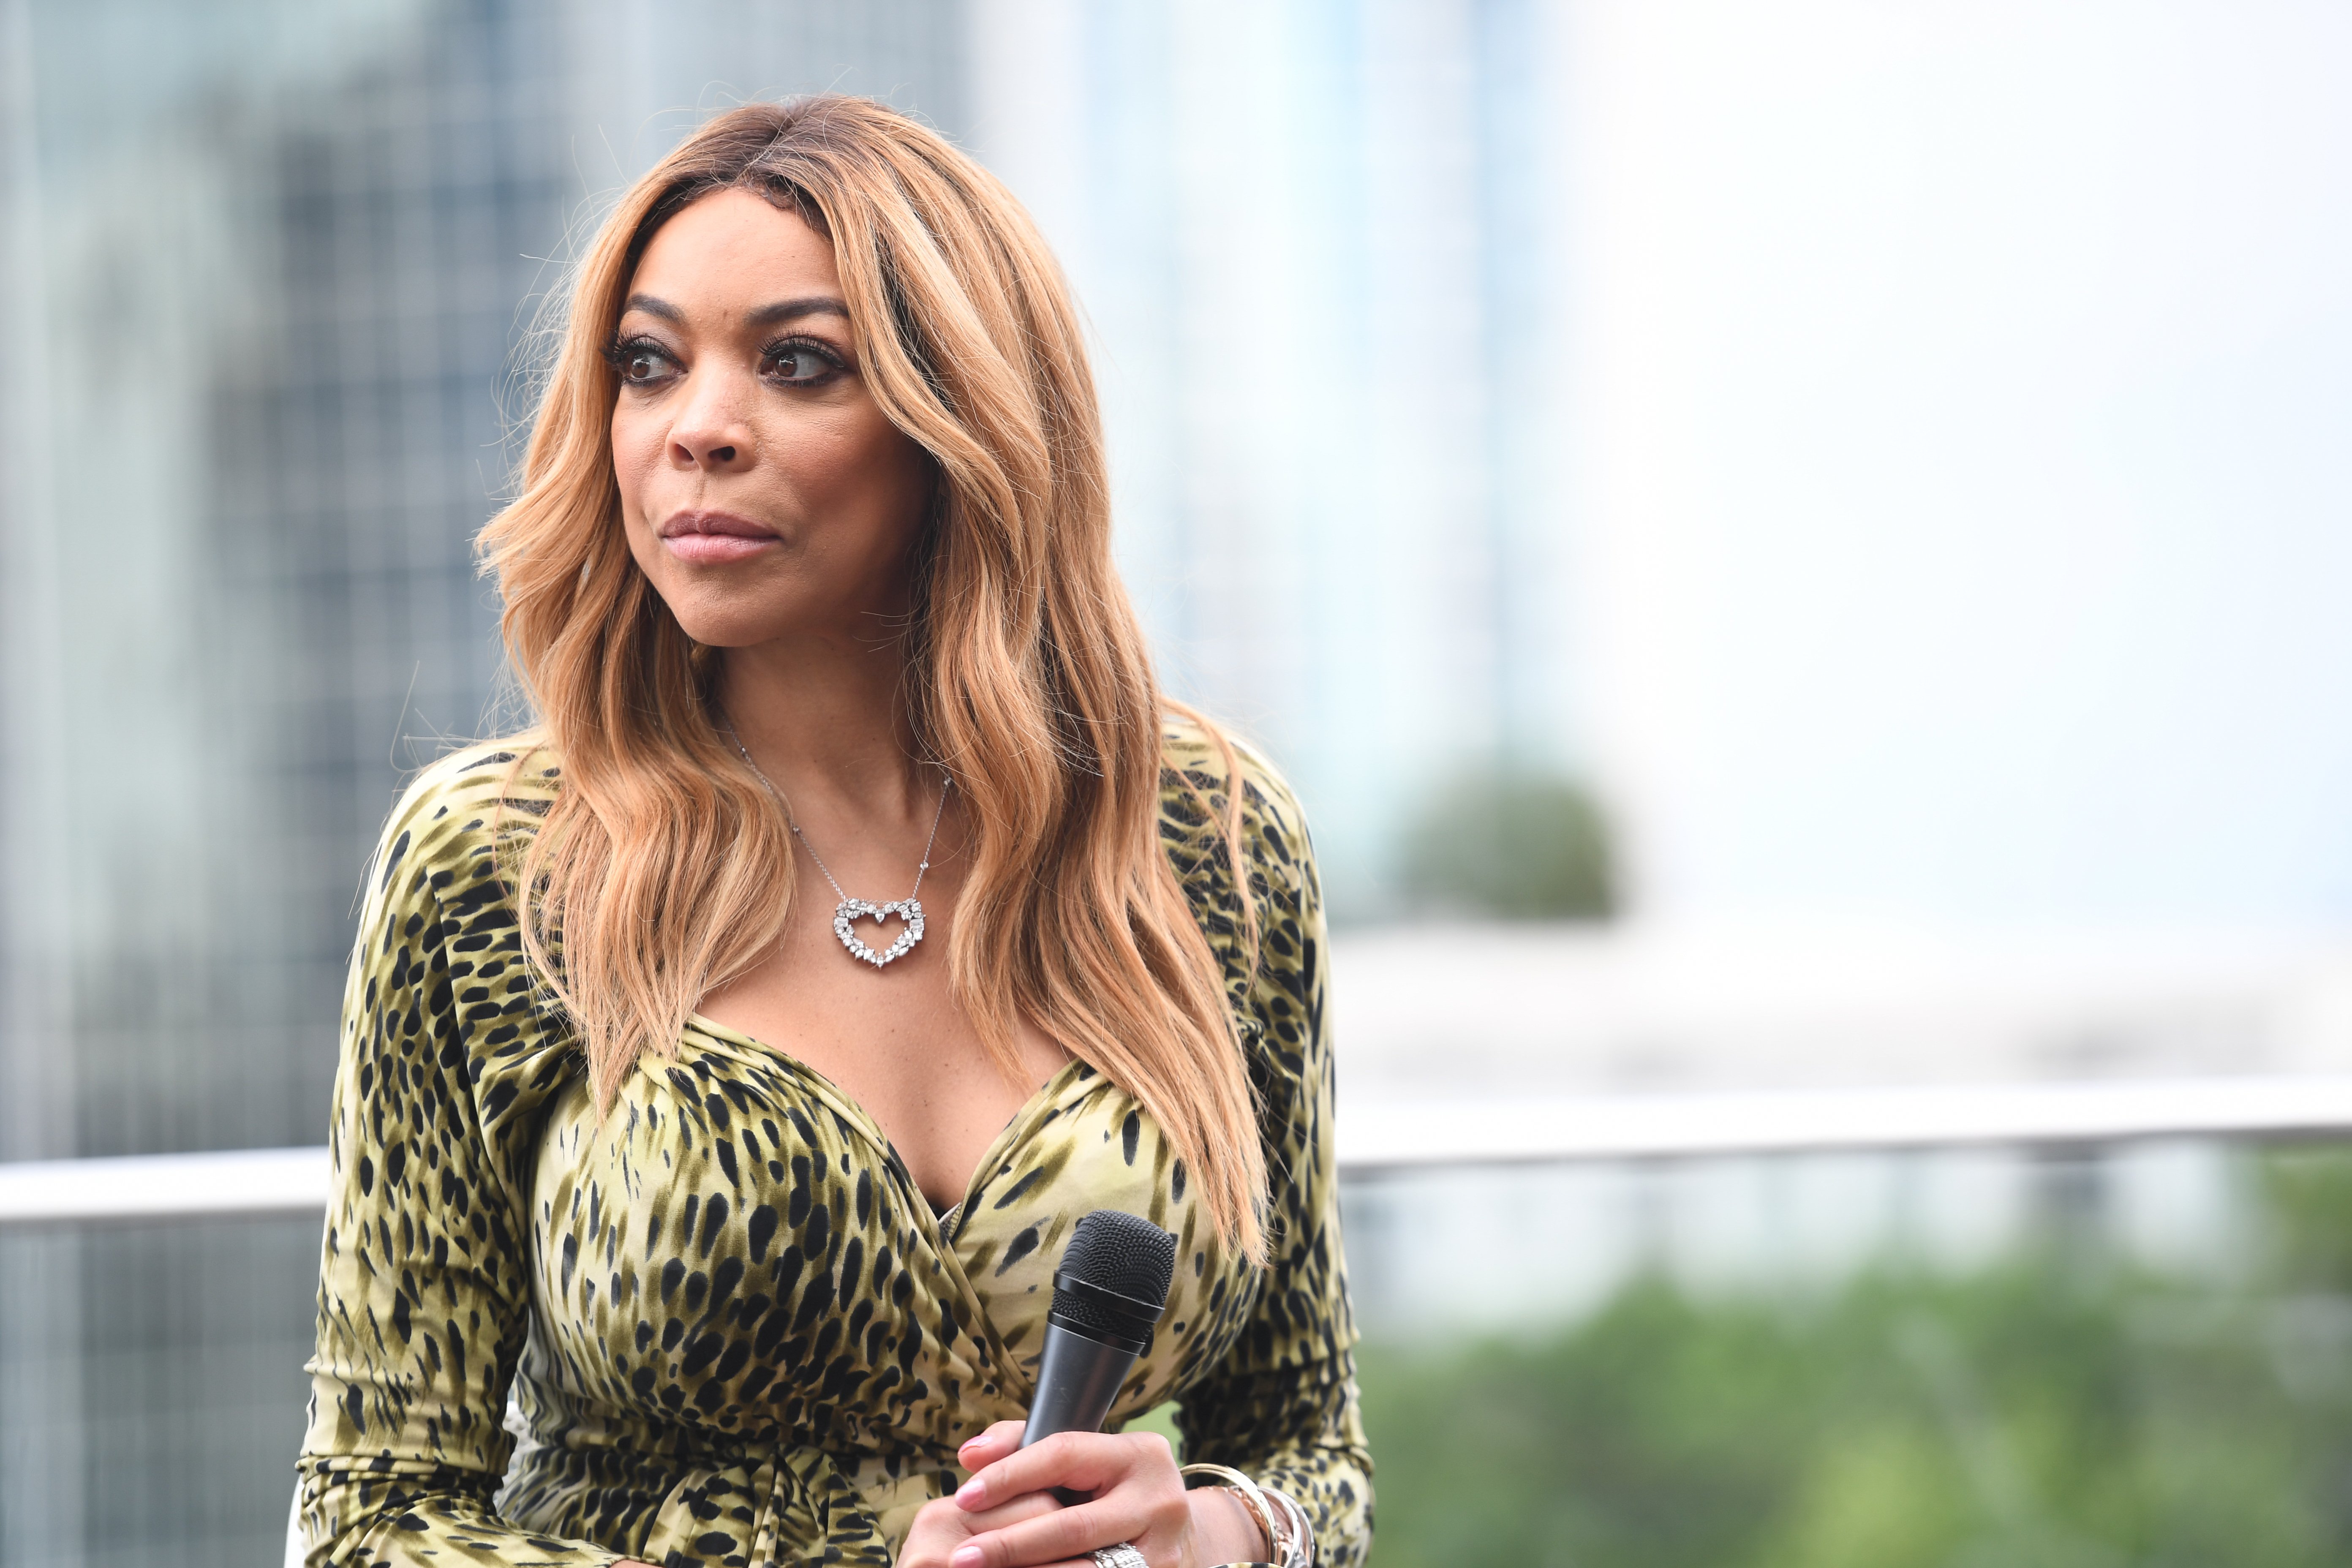 Wendy Williams at the Wendy Digital Event at Atalanta Tech Village Rooftop in August 2017. | Photo: Getty Images